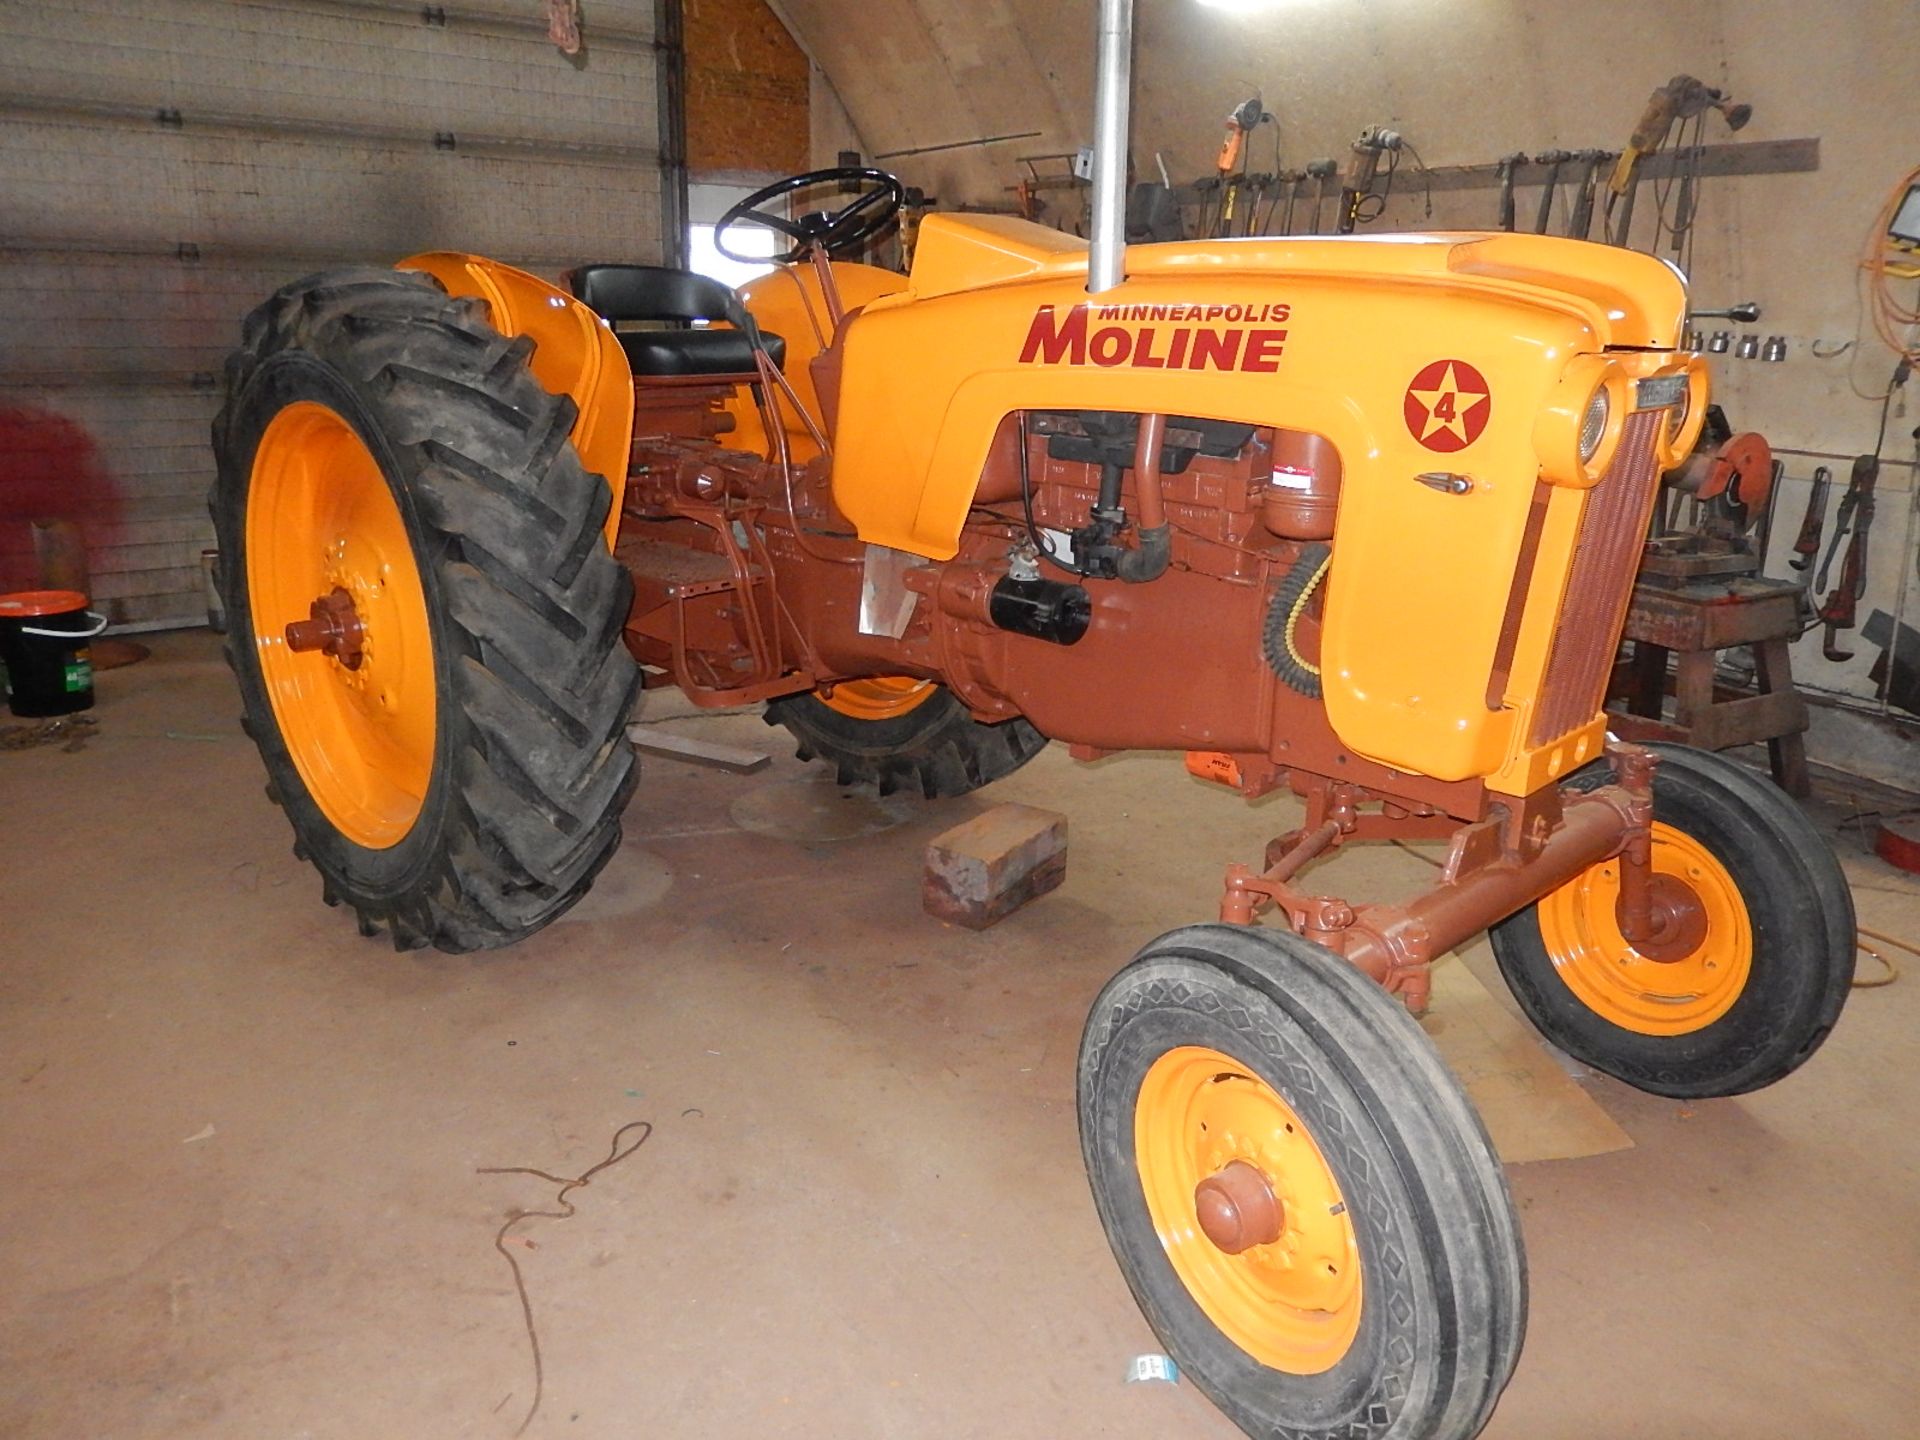 1959 Minneapolis Moline 4 Star tractor. S/N# 16600488. - Image 2 of 2